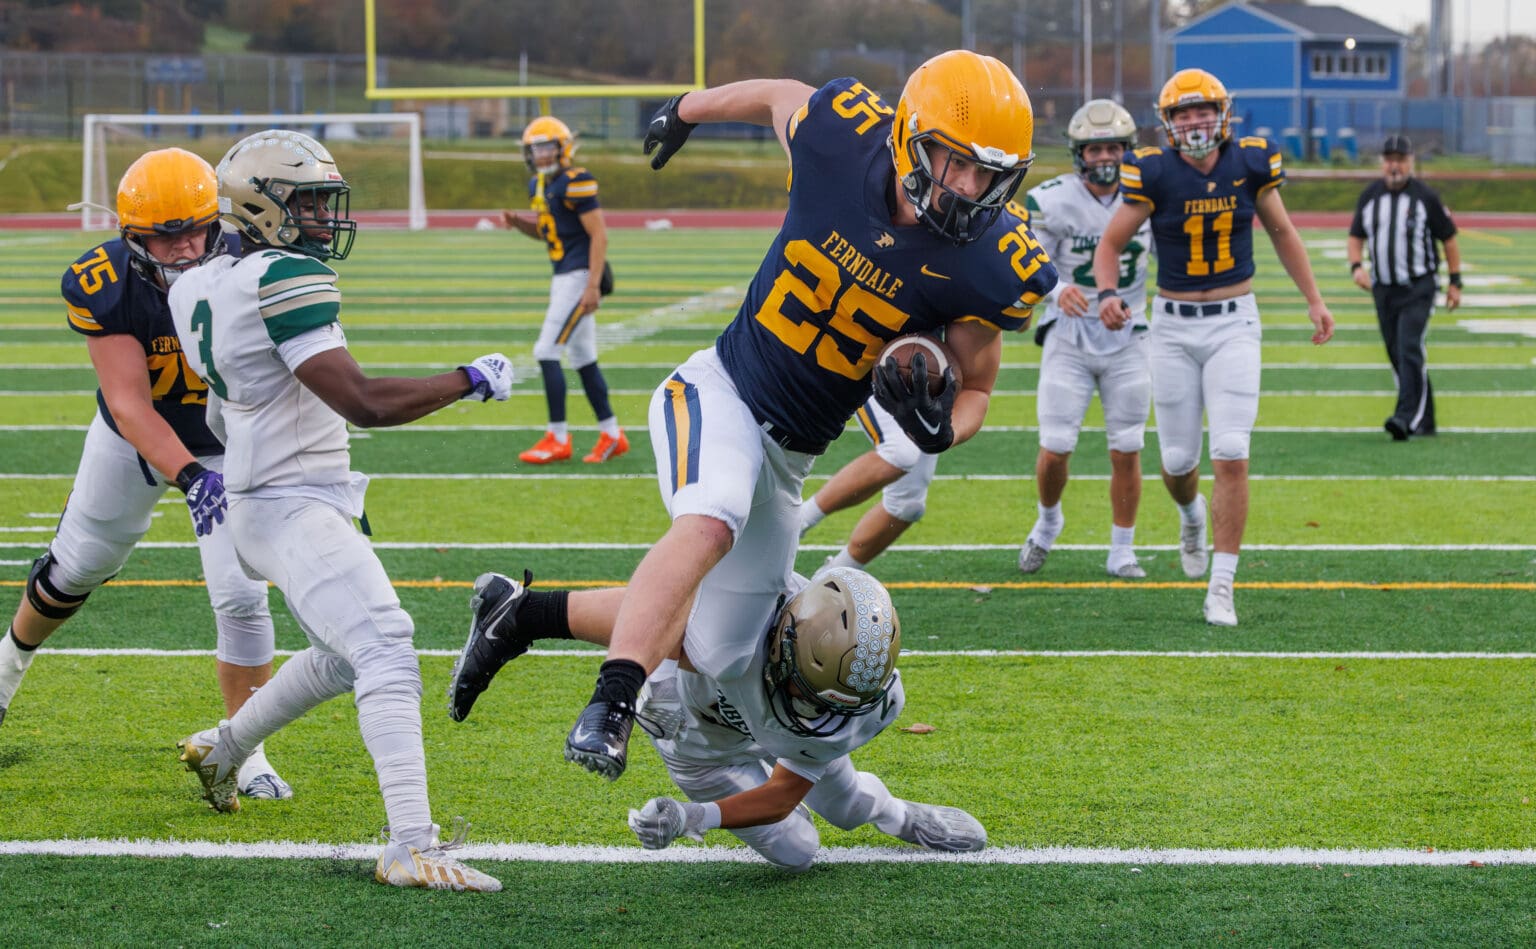 Ferndale’s Conner Walcker leaps in for the touchdown Saturday